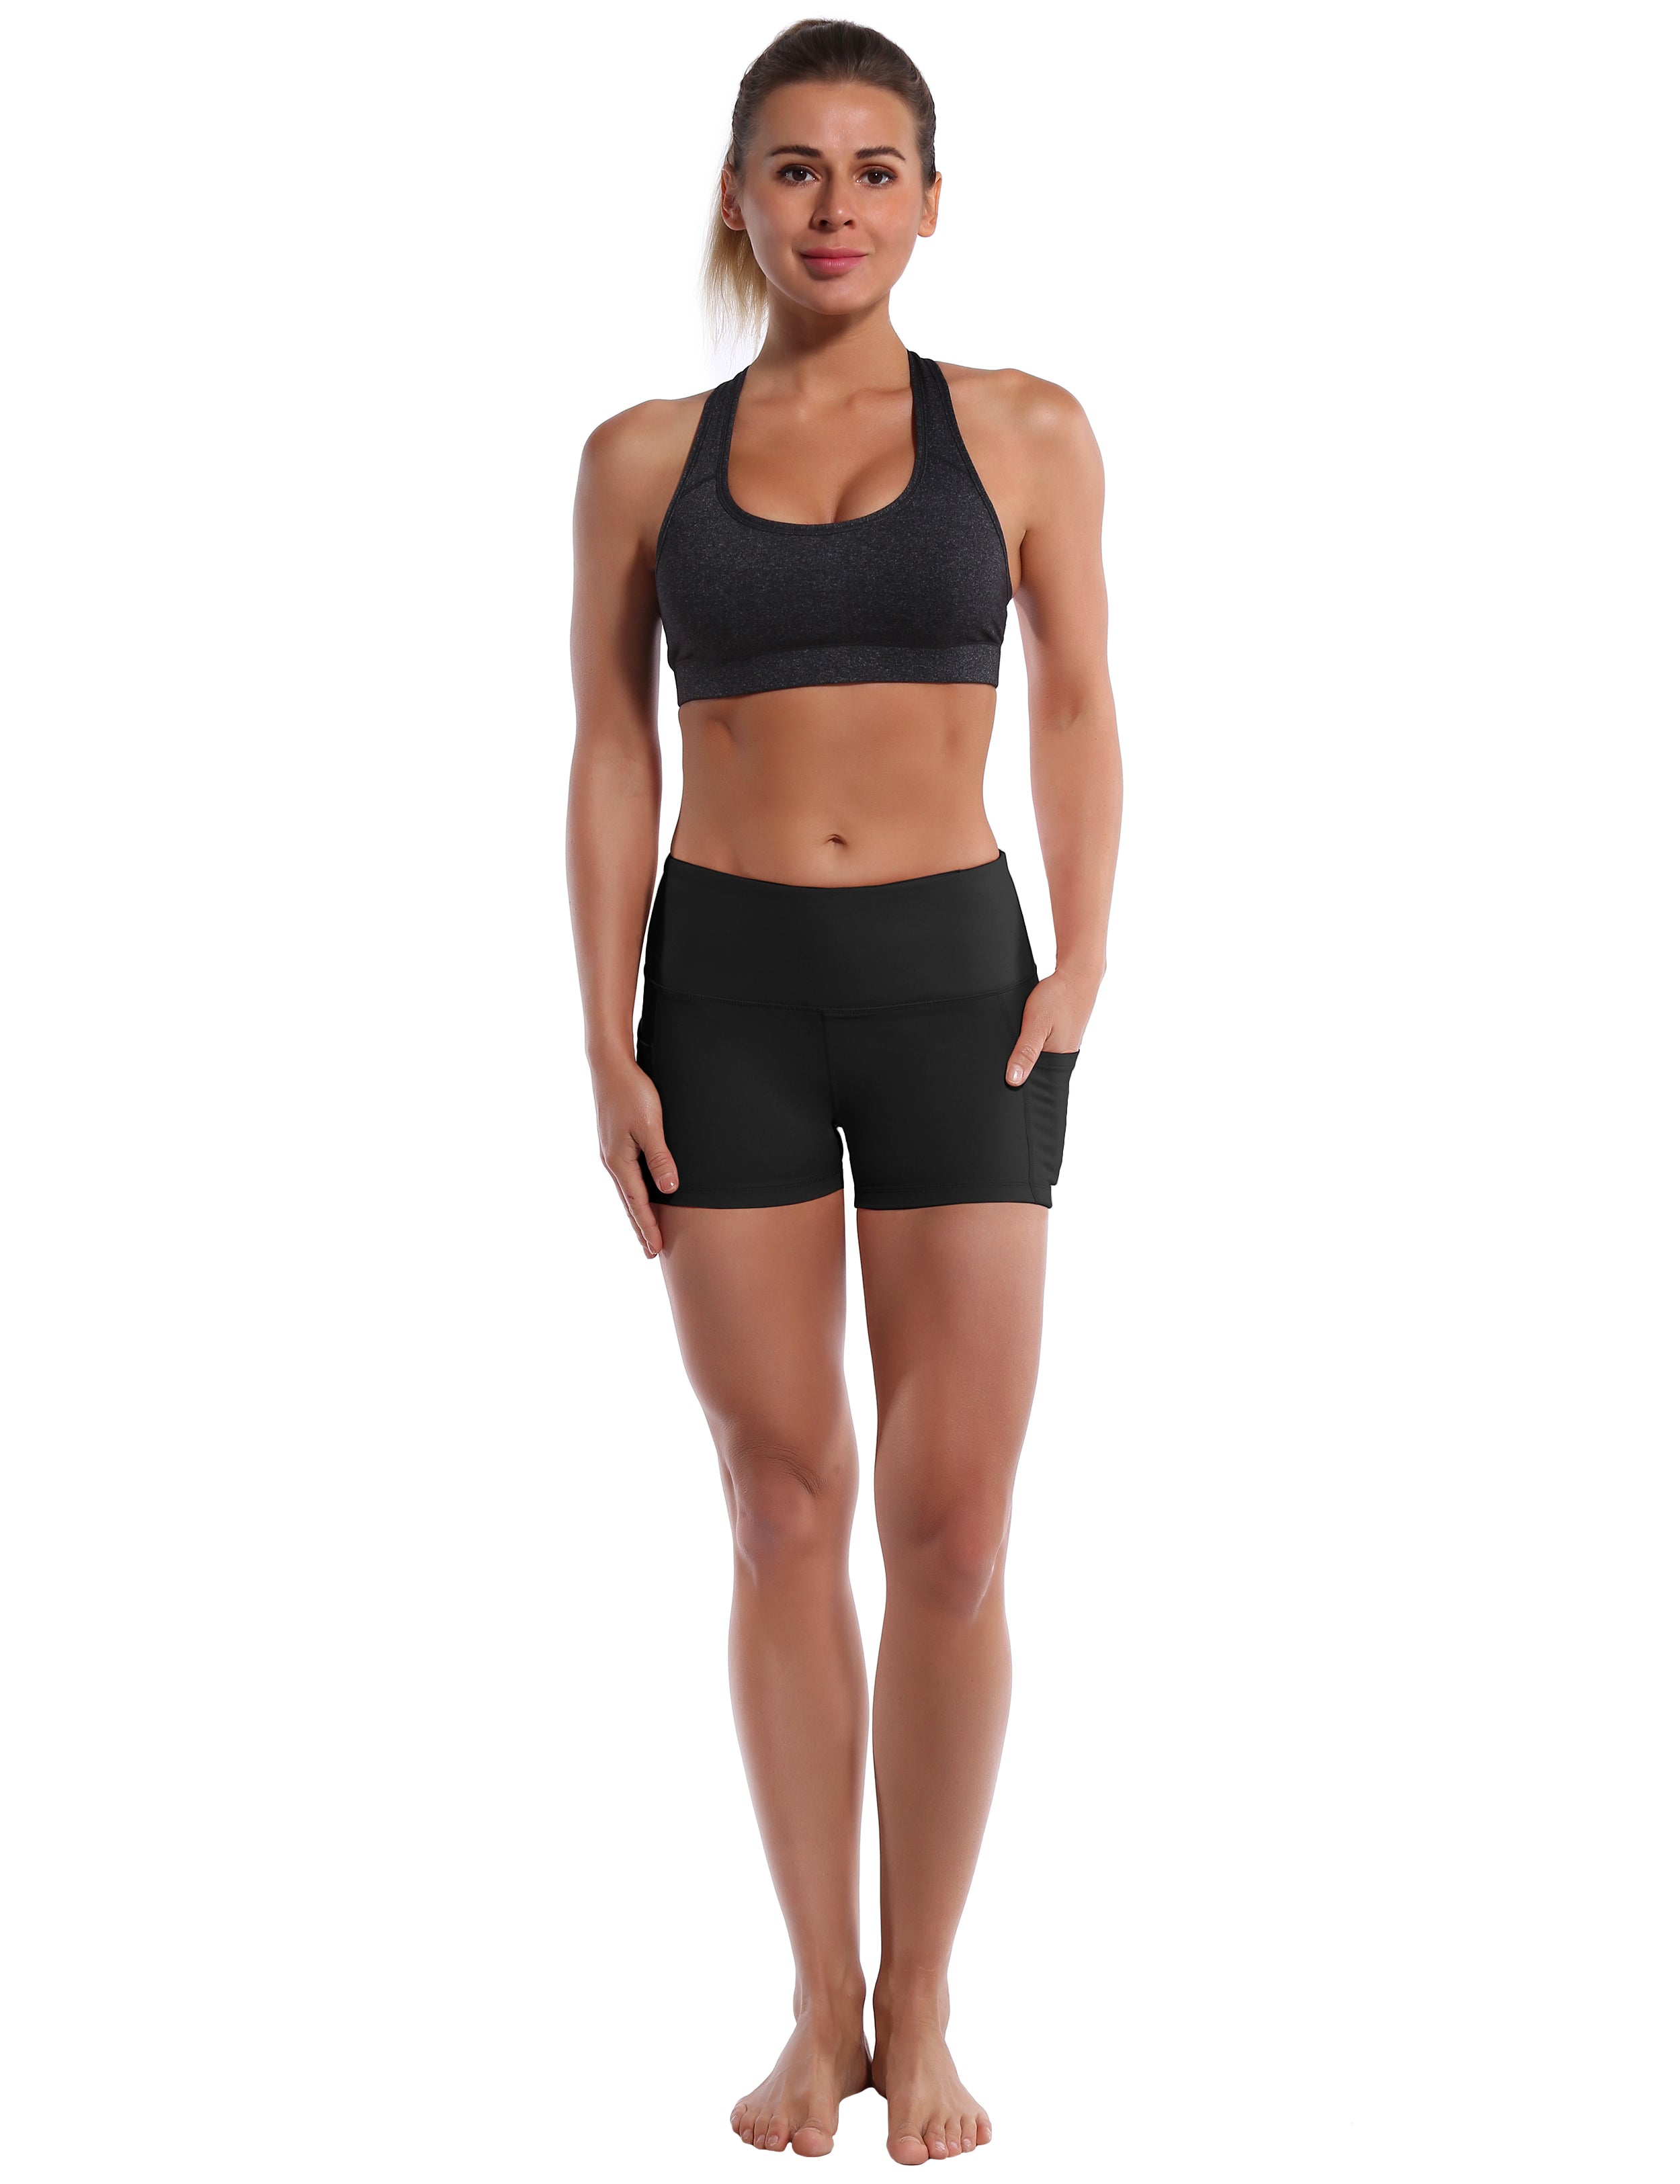 2.5" Side Pockets Yoga Shorts black Sleek, soft, smooth and totally comfortable: our newest sexy style is here. Softest-ever fabric High elasticity High density 4-way stretch Fabric doesn't attract lint easily No see-through Moisture-wicking Machine wash 78% Polyester, 22% Spandex